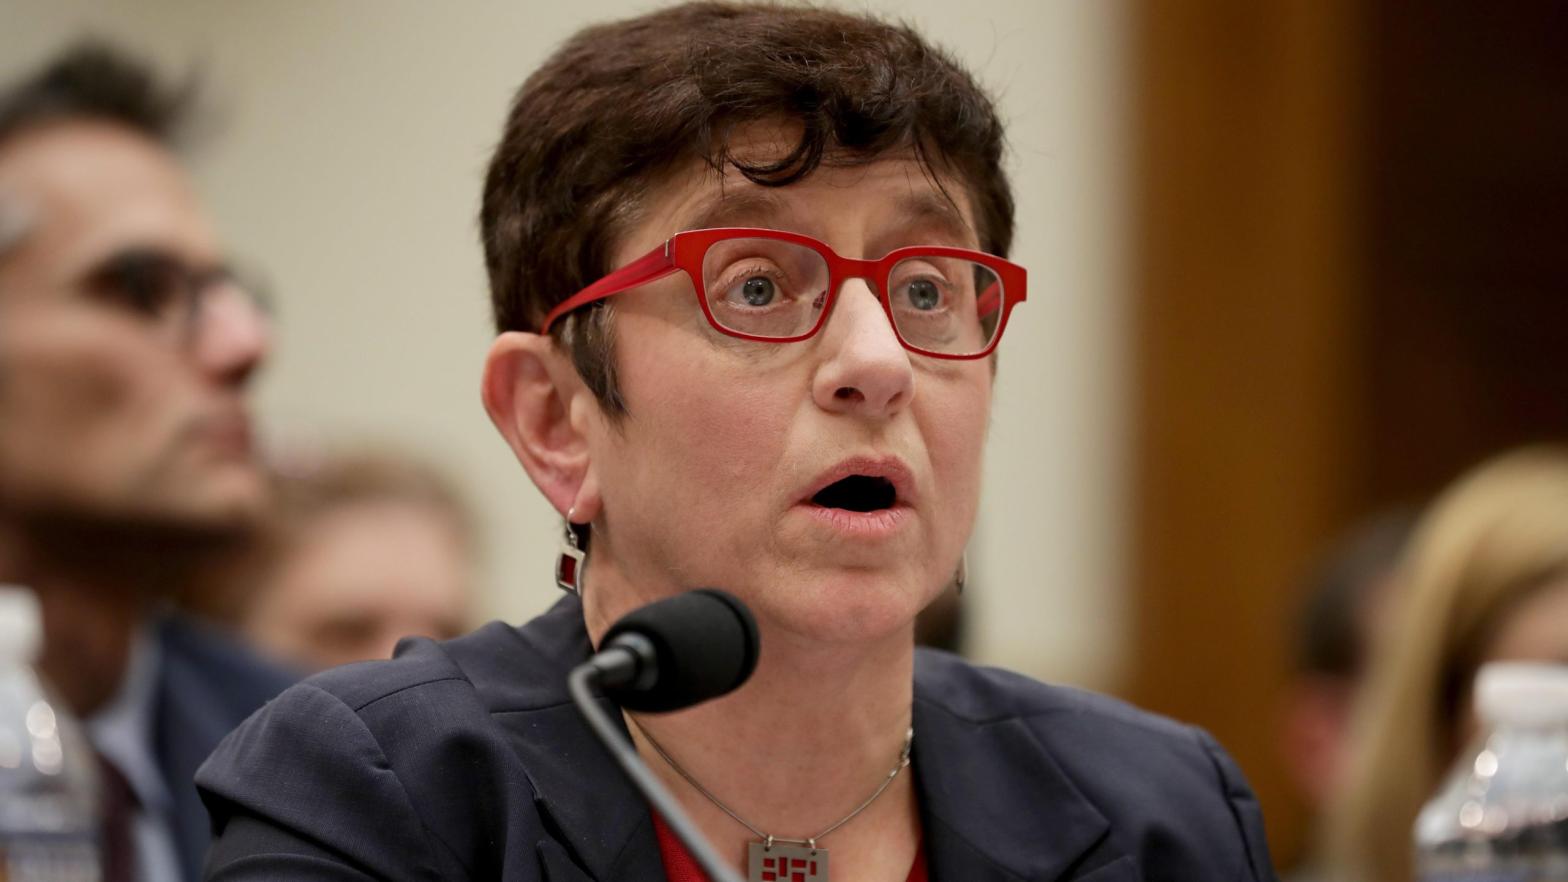 Gigi Sohn, Biden's nominee for the fifth slot on the Federal Communications Commission, testifying before the House Judiciary Committee's antitrust subcommittee on March 12, 2019. (Photo: Chip Somodevilla, Getty Images)